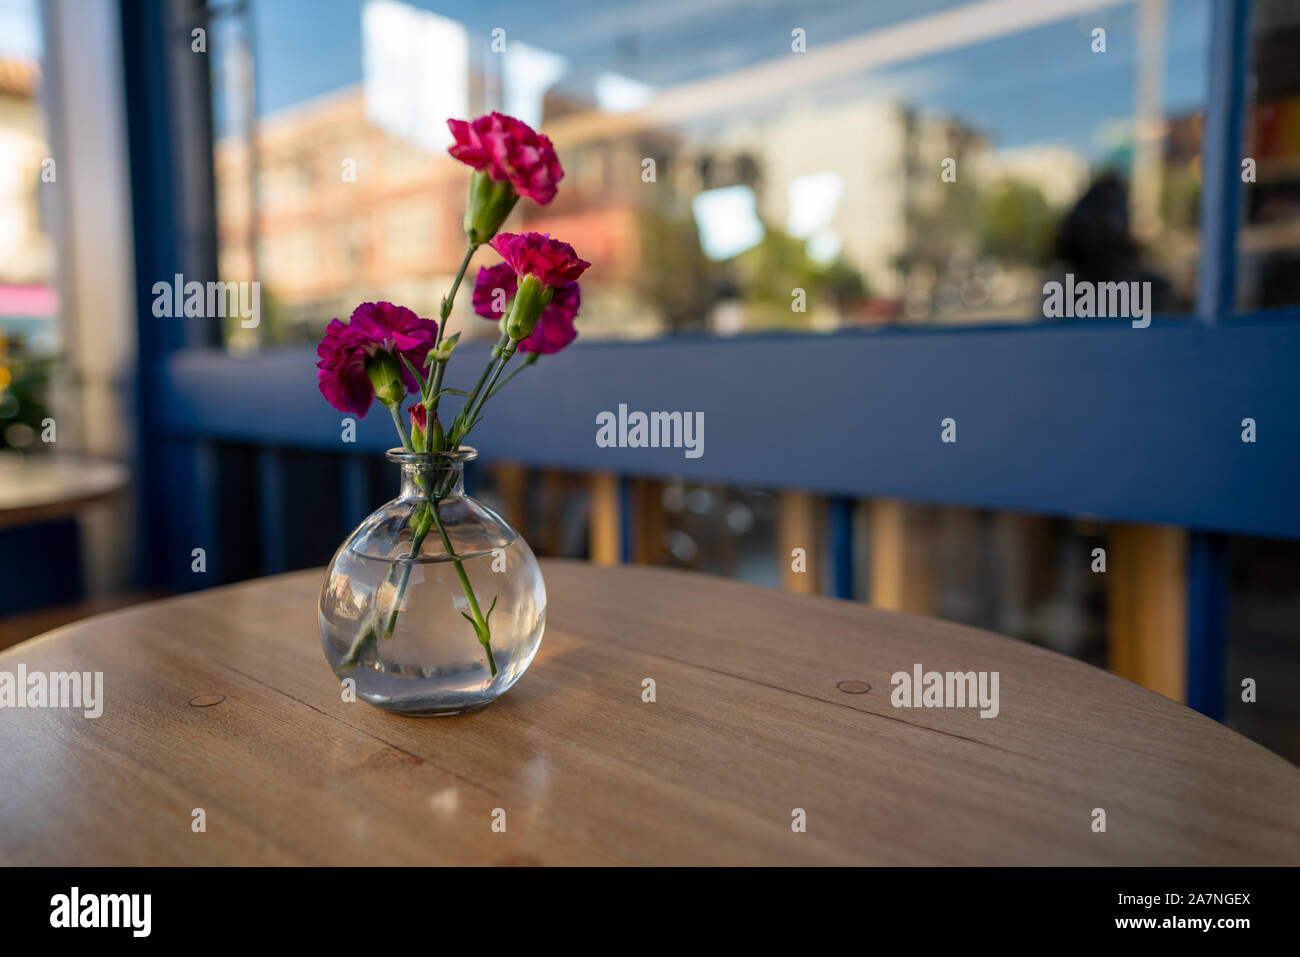 Multiple urple carnation flower in a round glass vase on wooden table outside Stock Photo